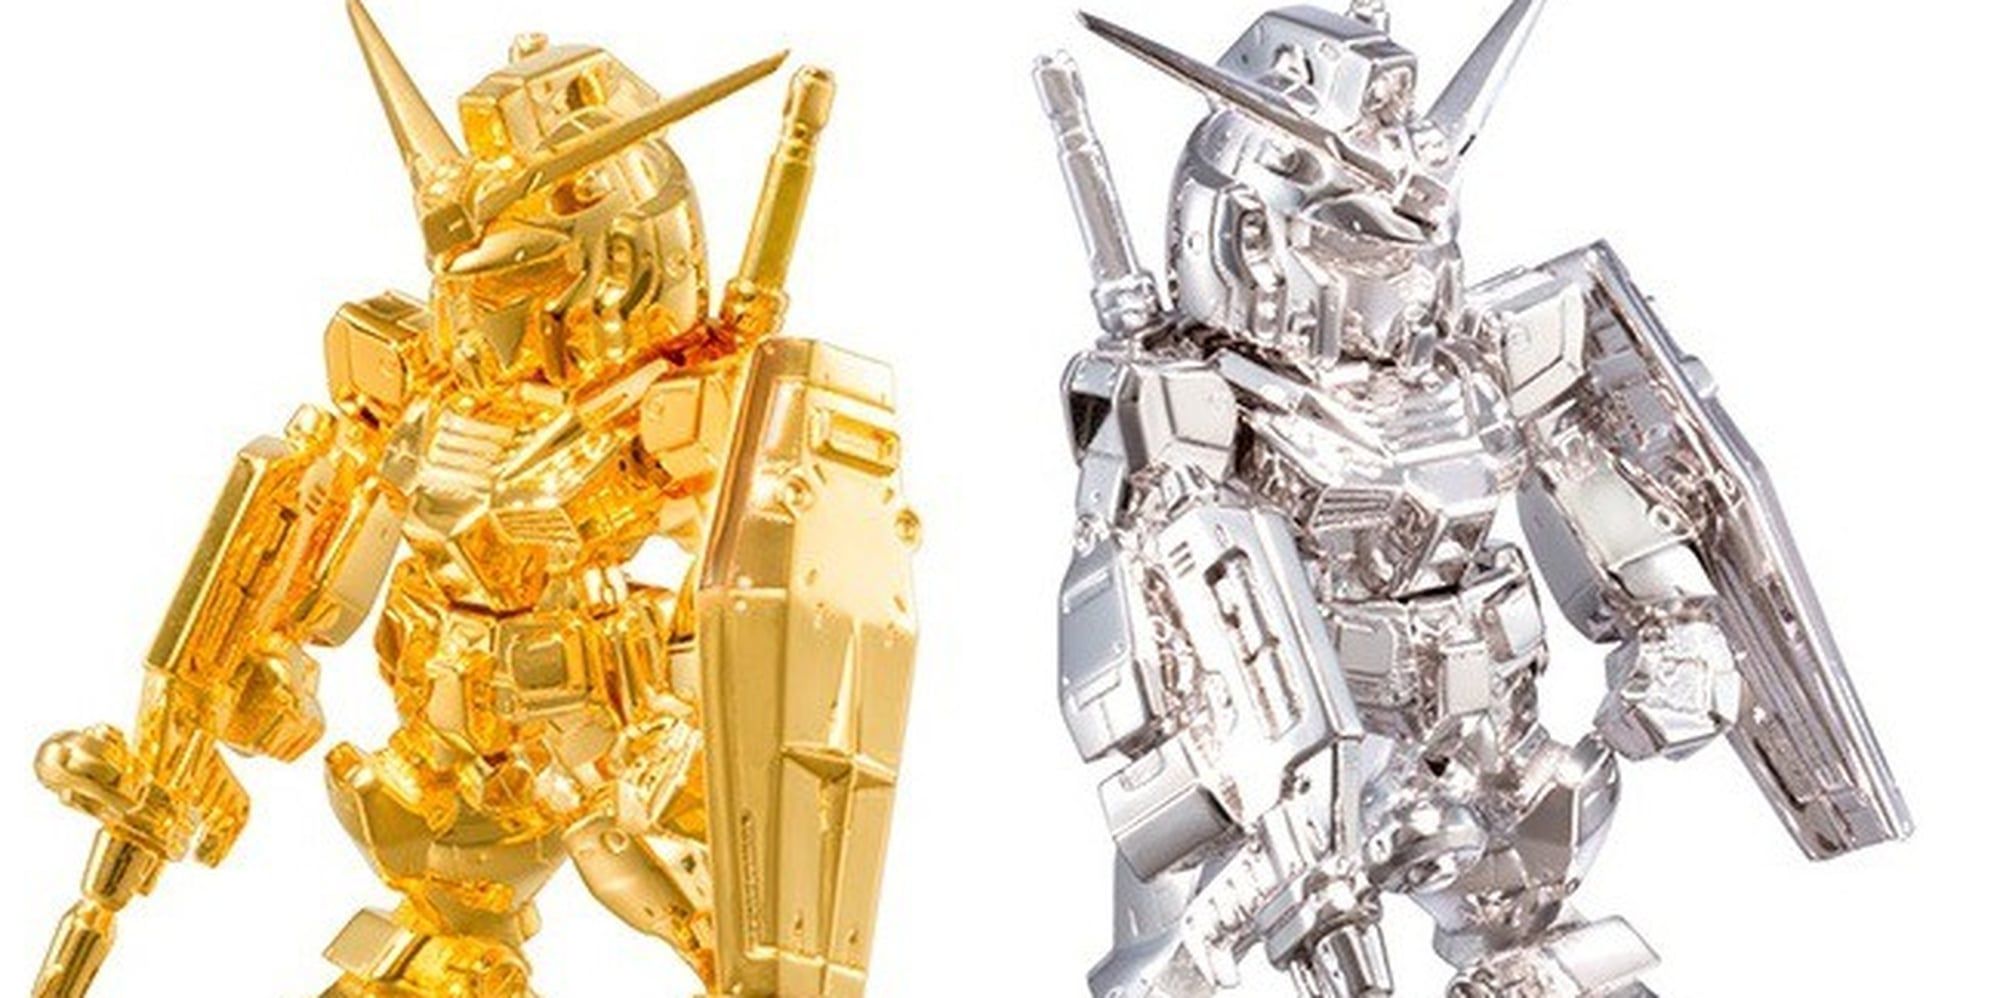 The 10 Most Expensive Anime Figures of AllTime Ranked